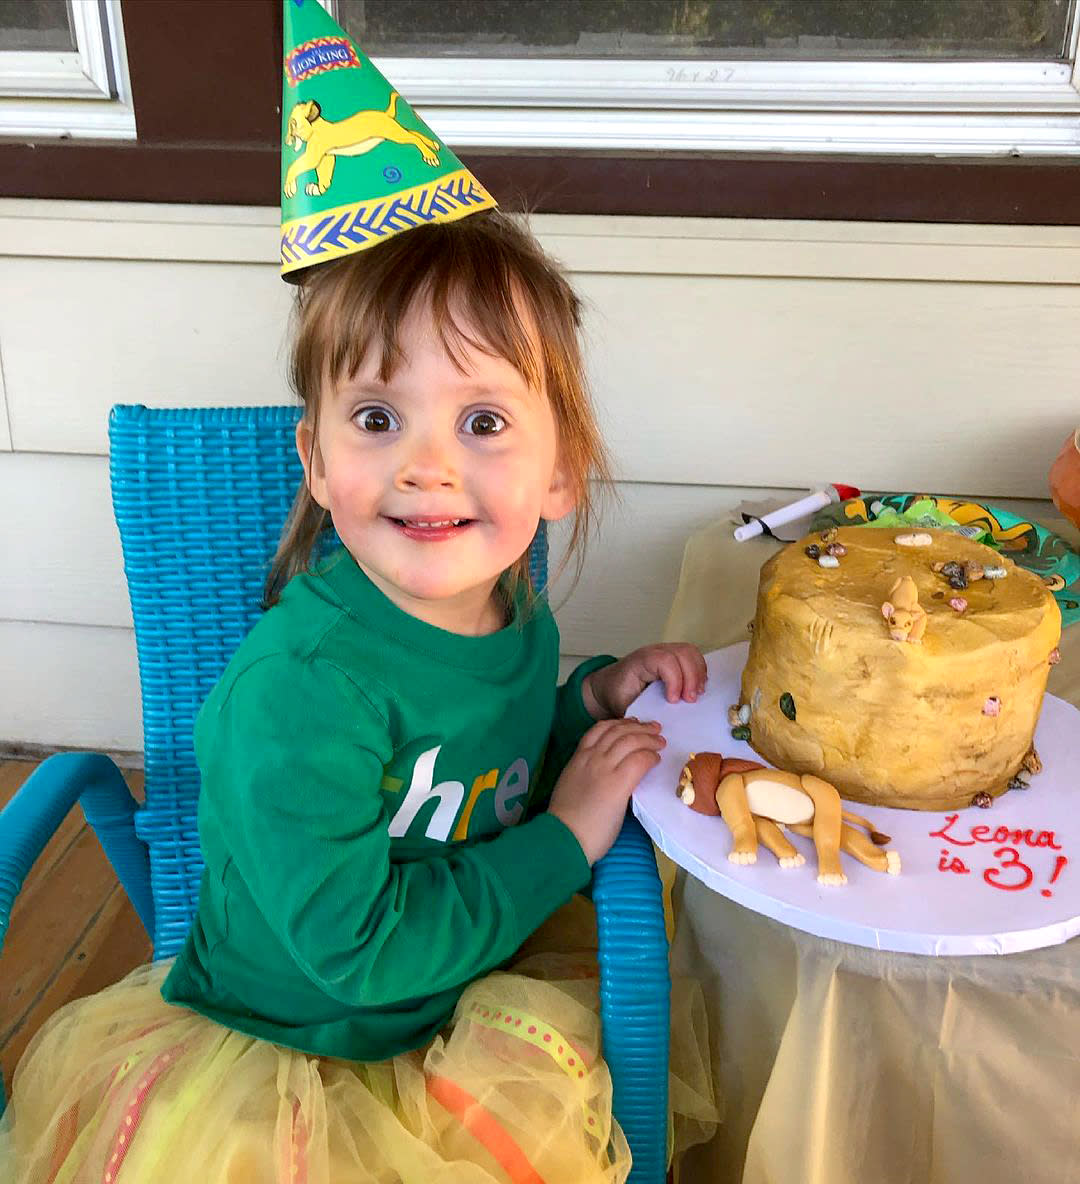 Girl 3 Requests Morbid Lion King Scene On Birthday Cake So She Can